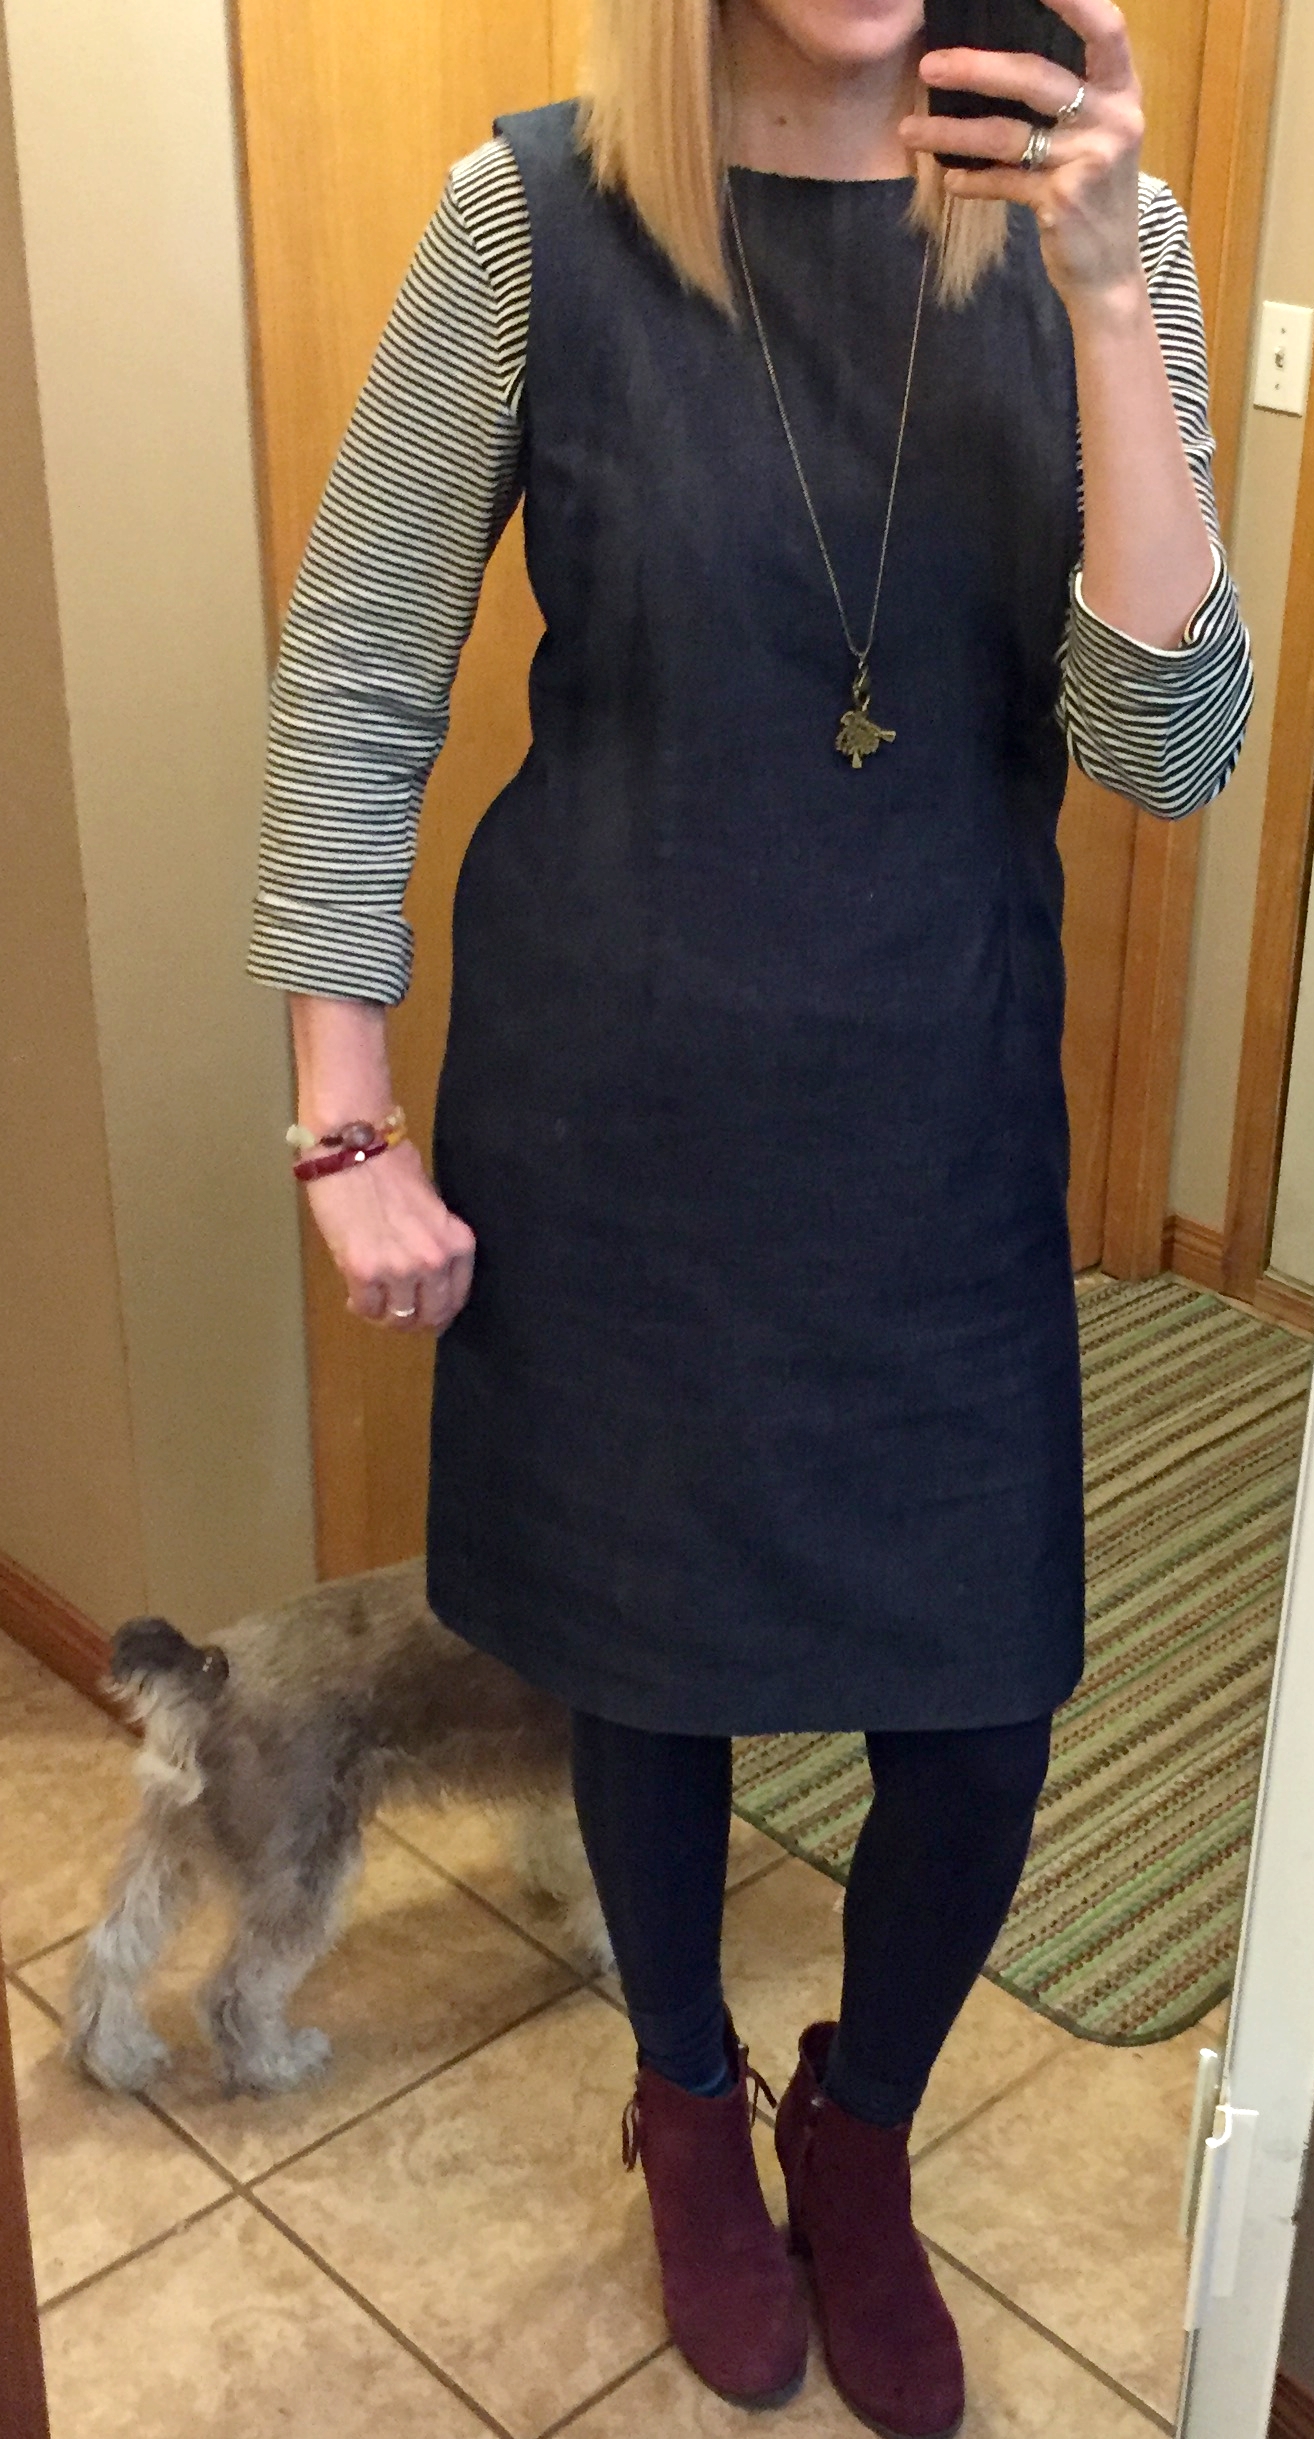 I selected my denim sheath on purpose - it looks good with ALL accessories, but on its own... meh.